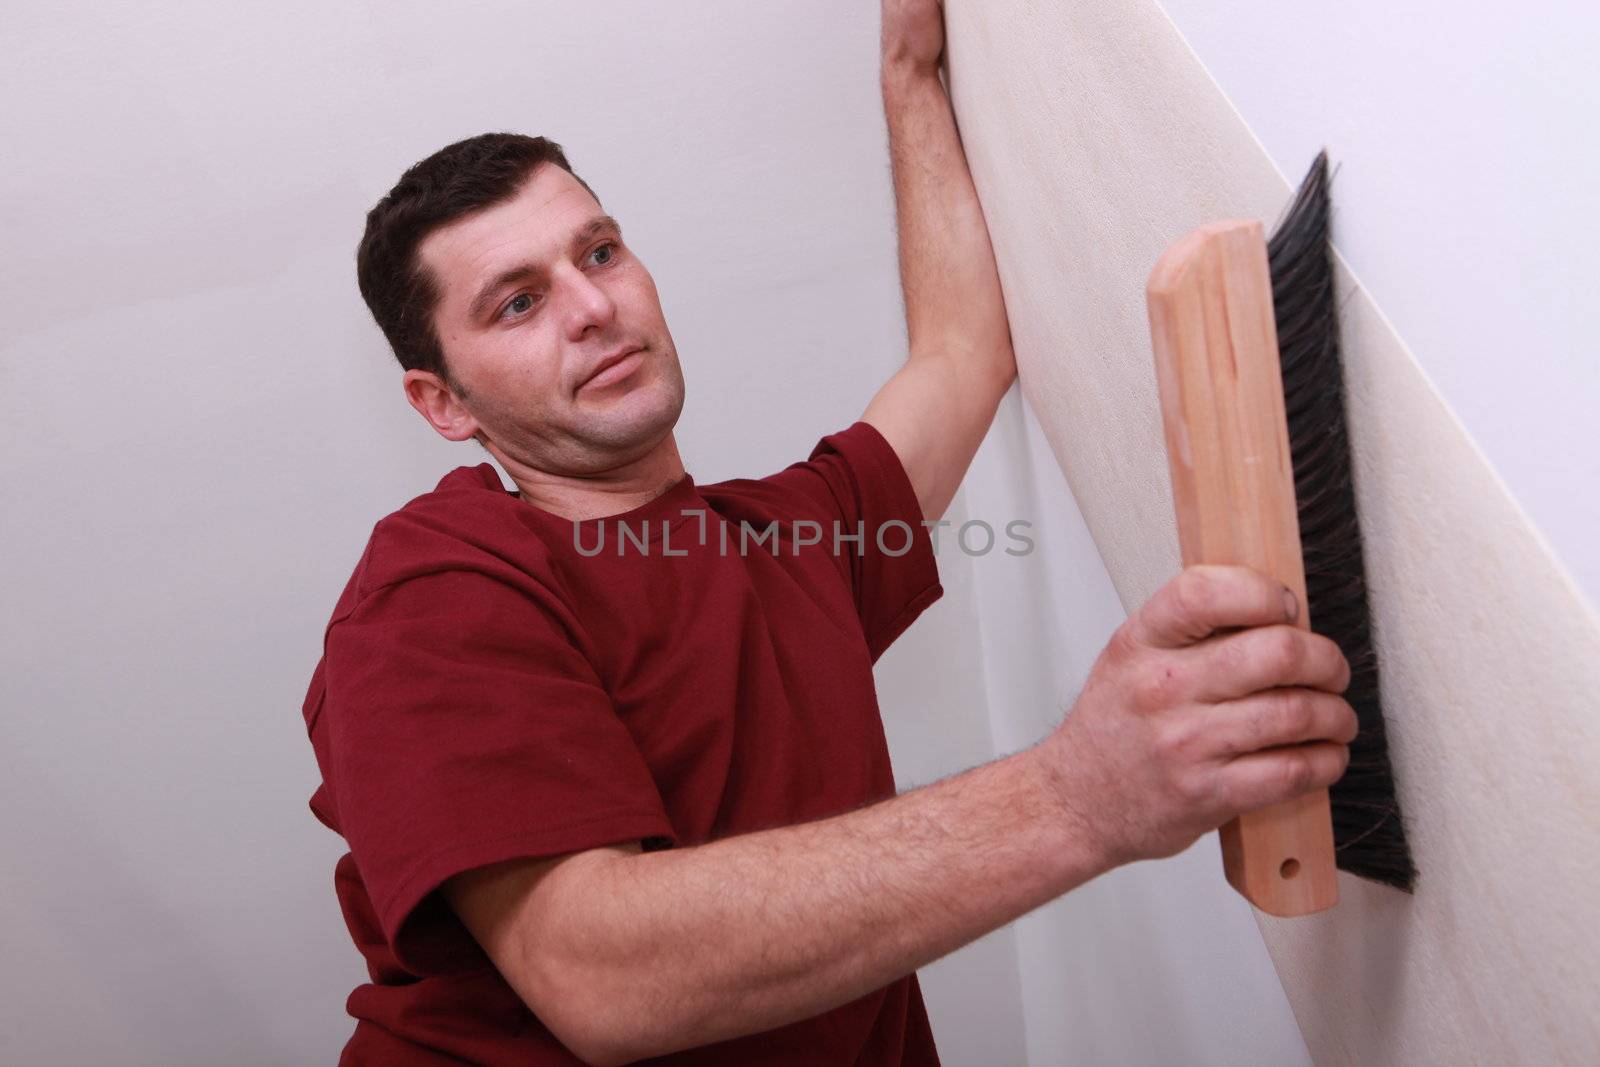 Low shot of a man smoothing wallpaper with a large brush